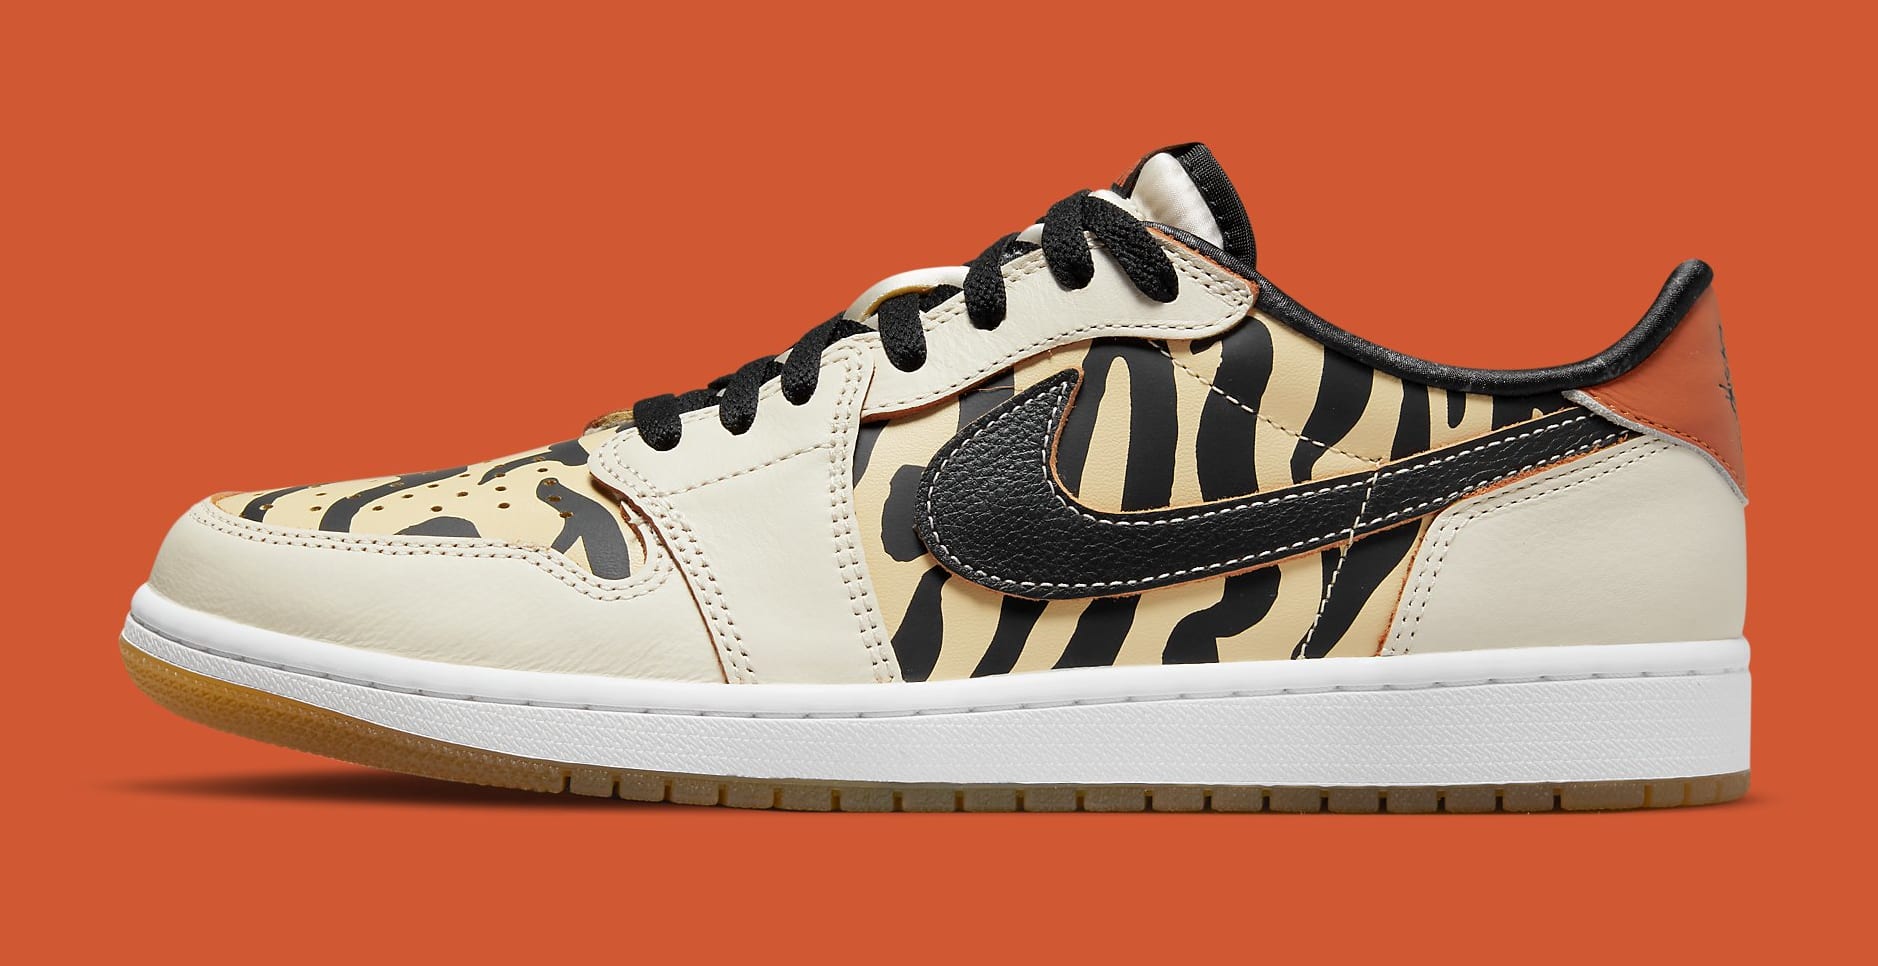 Air Jordan 1 Low 'Year of the Tiger' Release Date DH6932-100 